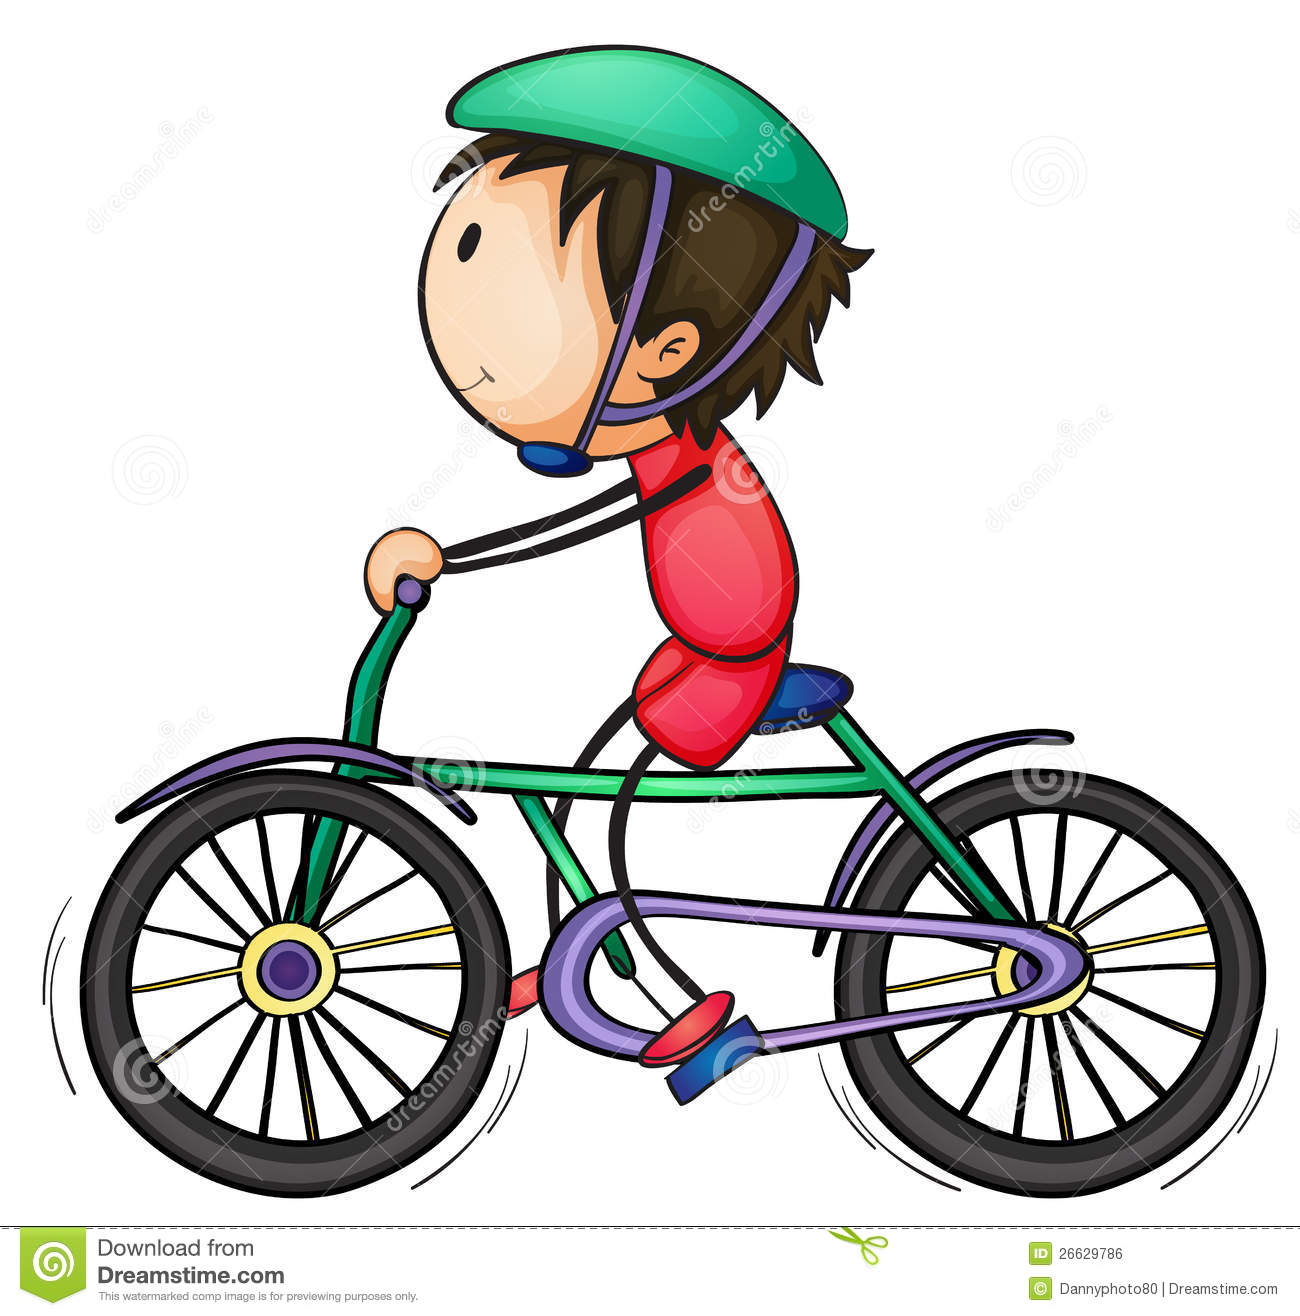 Boy And Bicycle Royalty Free Stock Image   Image  26629786